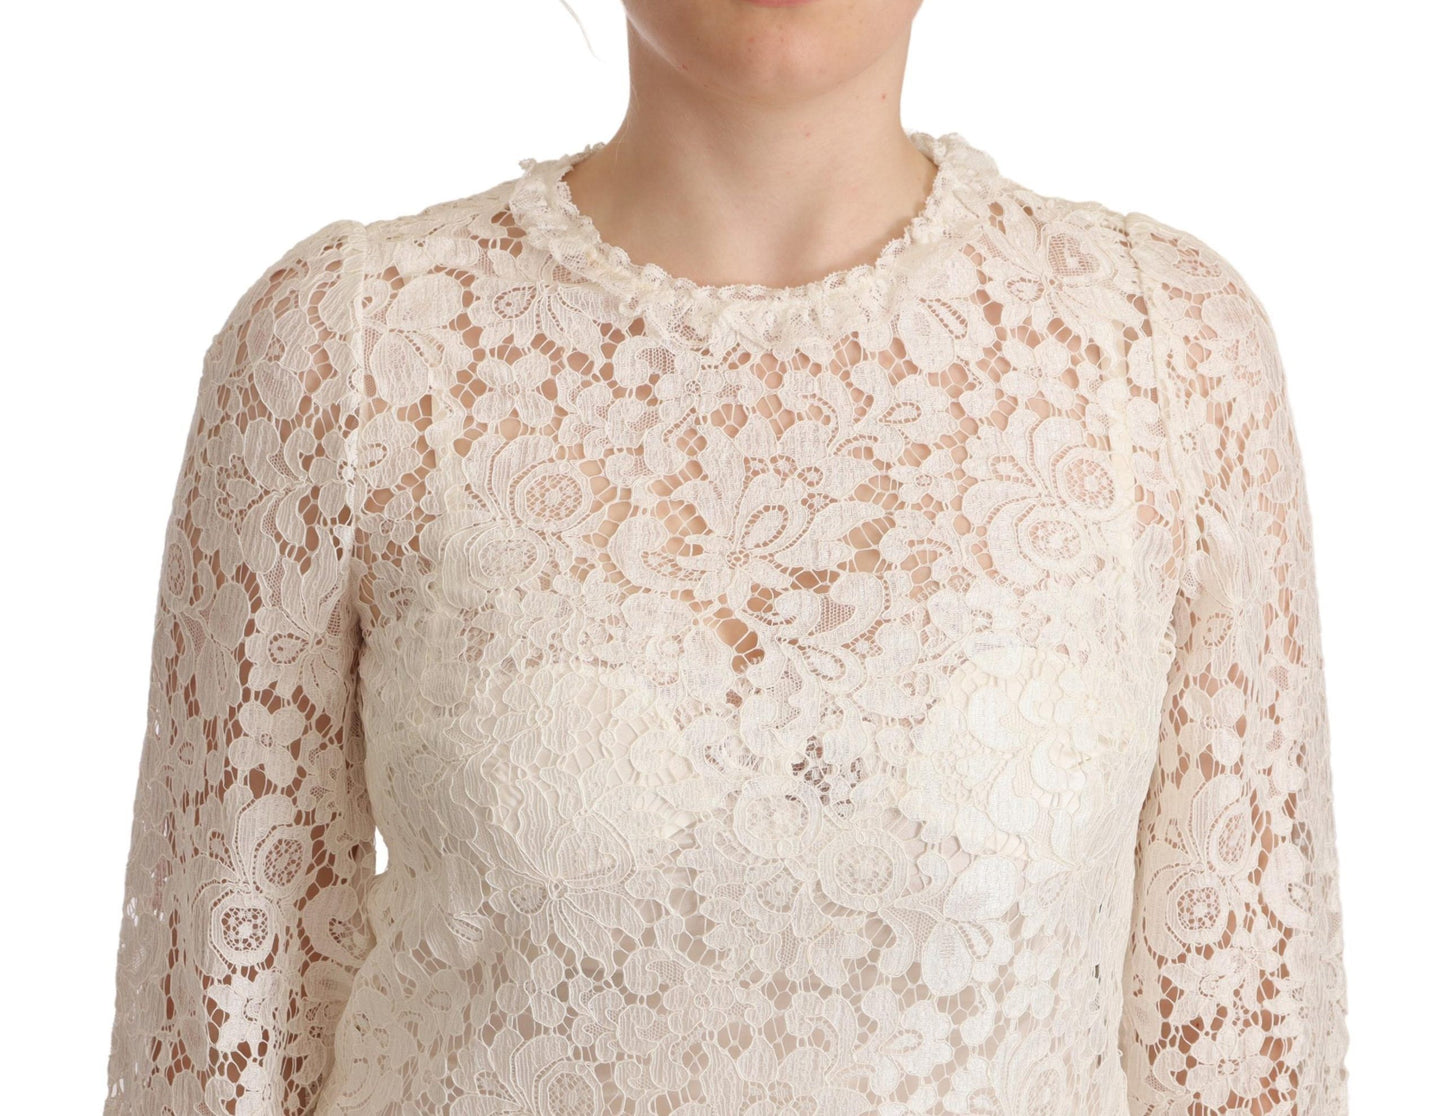 Elegant White Floral Lace Top with 3/4 Sleeves